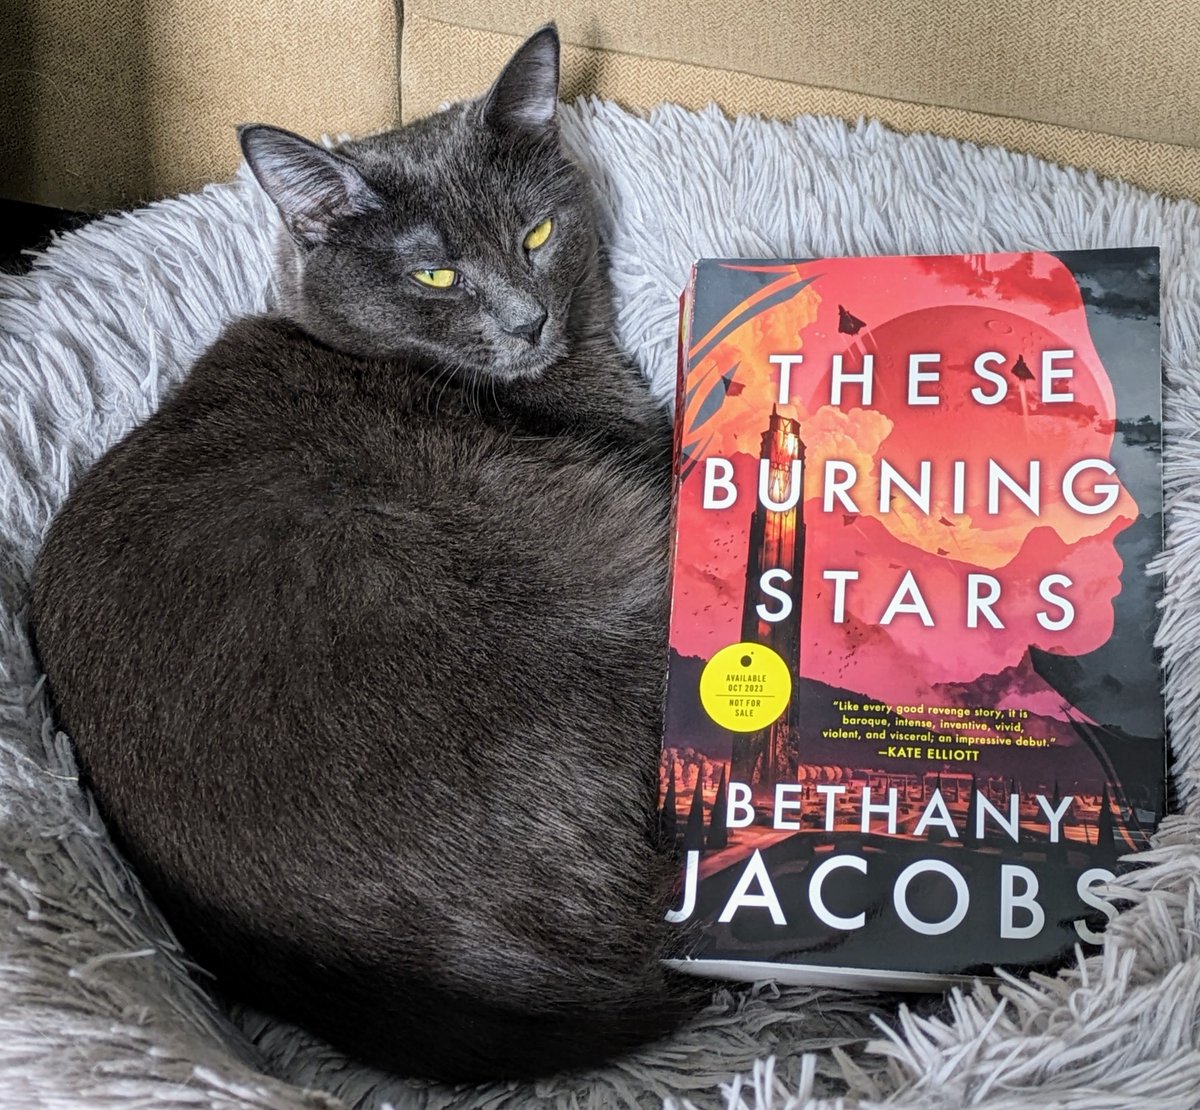 I'm really looking forward to reading #TheseBurningStars by @BethanyGJacobs! A revenge tale, a star-spanning empire, and a hunt for a secret that could collapse worlds. Comes out this Oct. I can't wait for people to read it! #CatsofTwitter #bookmail